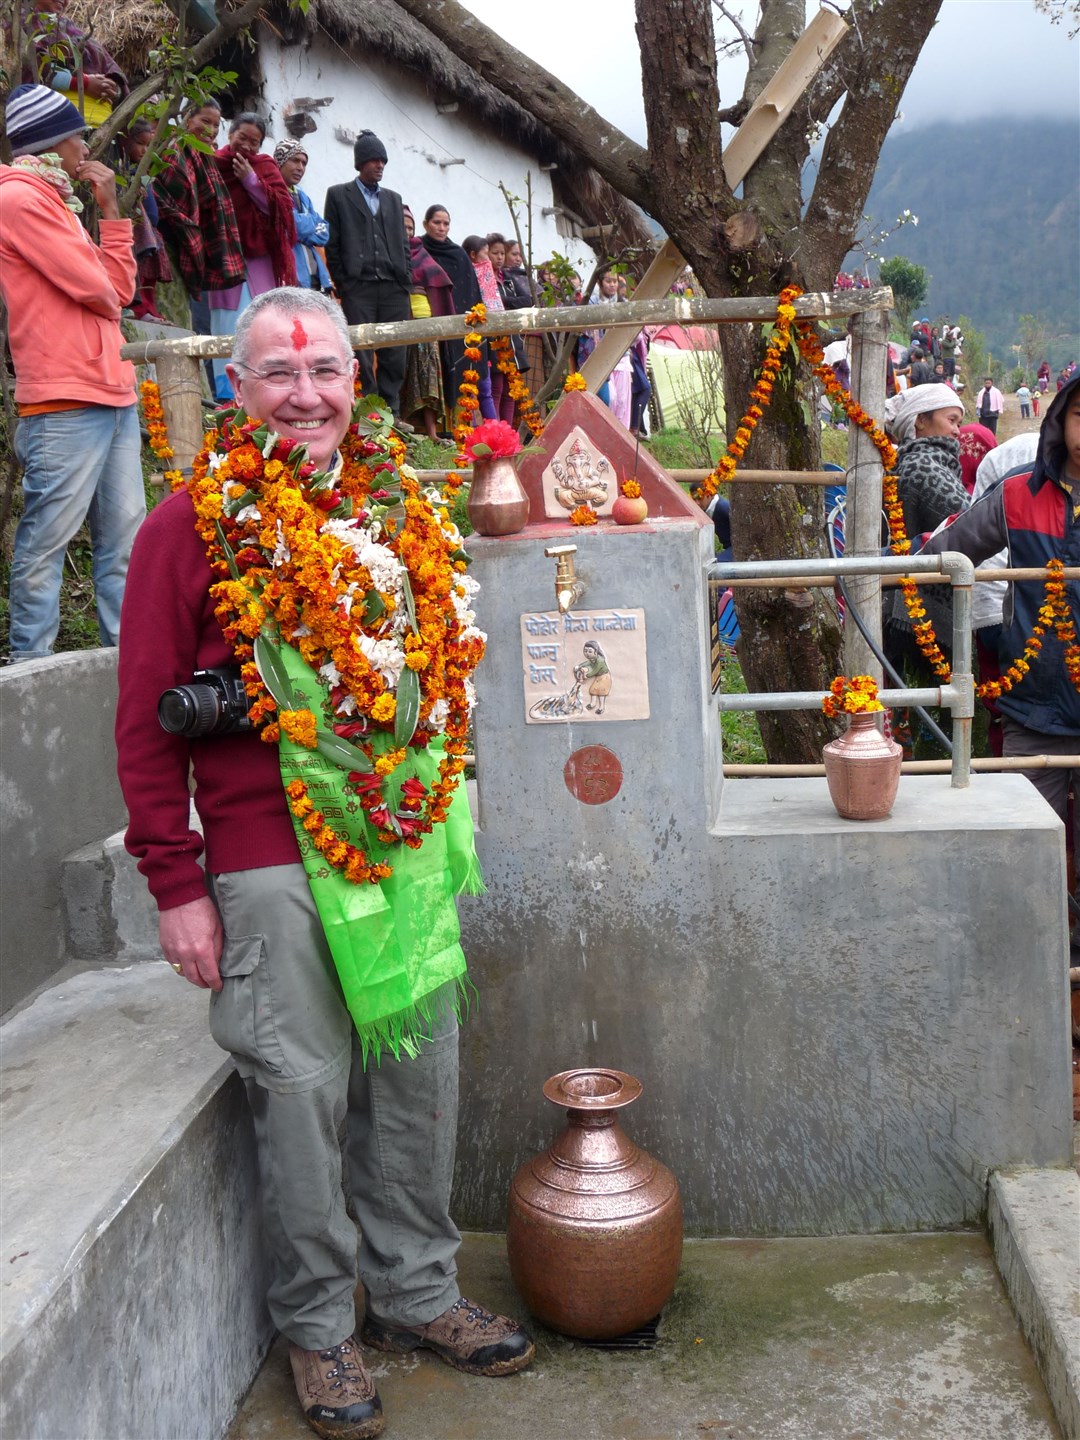 Past President Bill Ross with a celebratory water tap in Kades, Nepal in 2014.